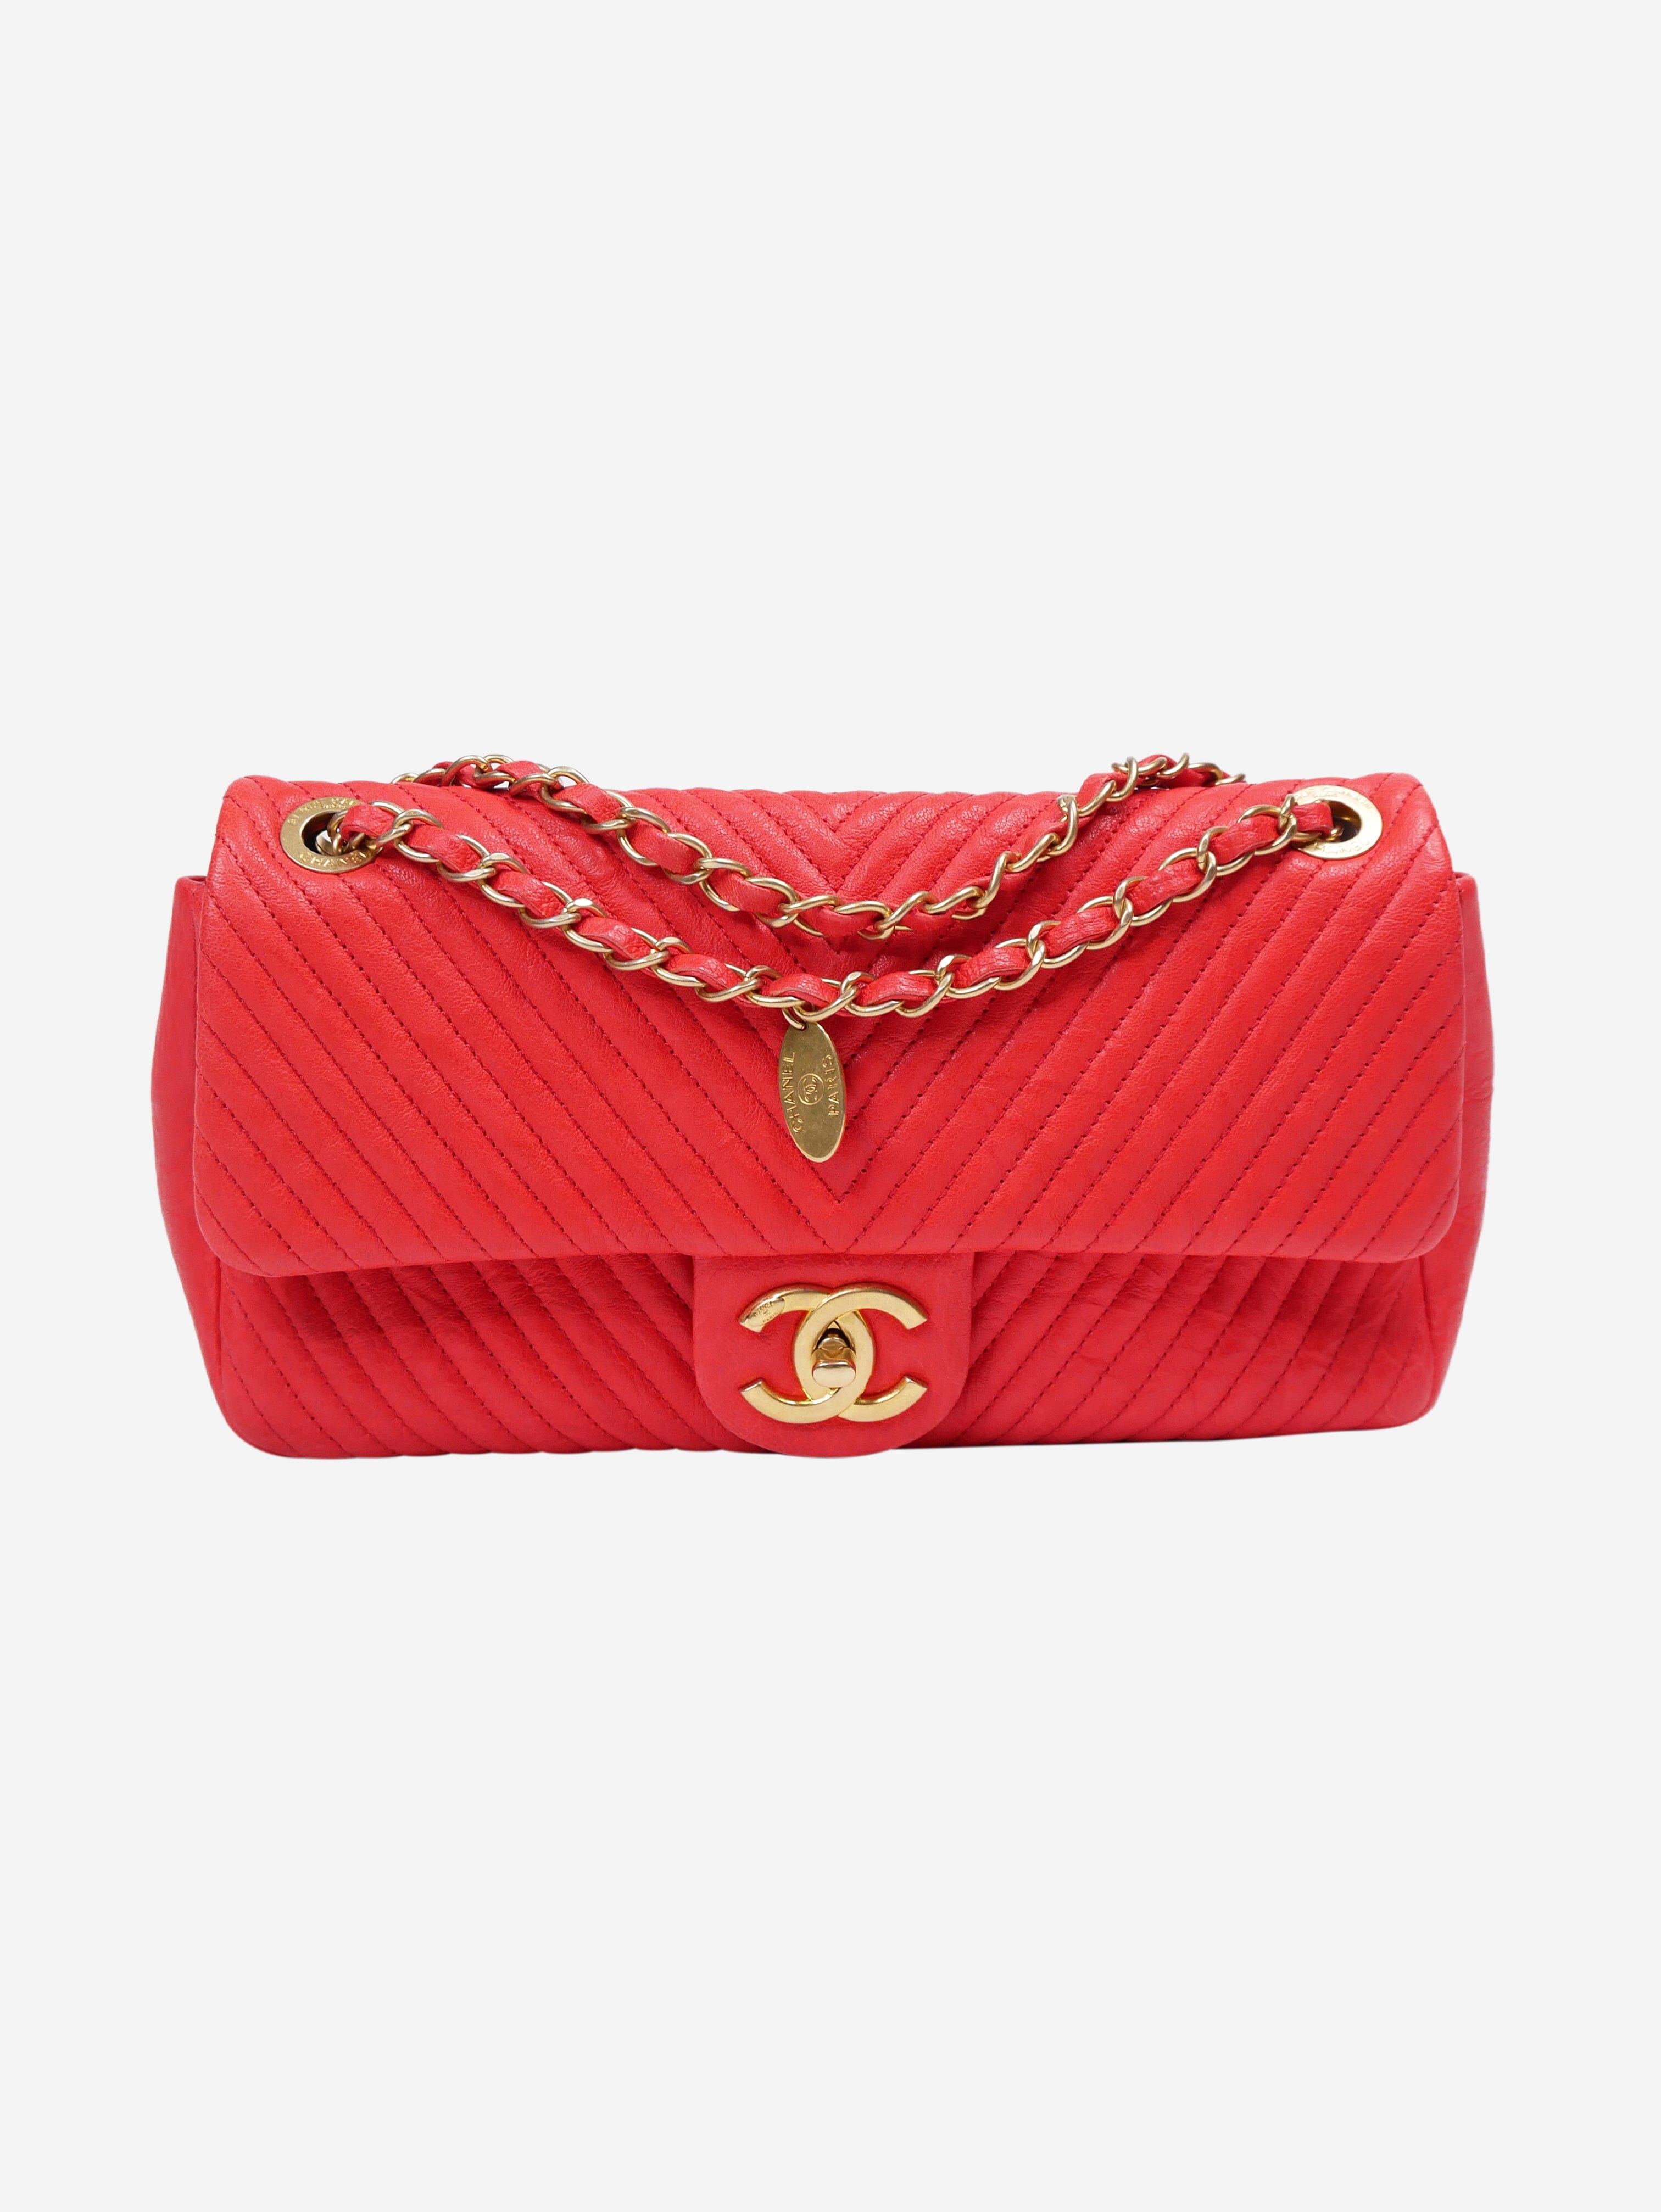 Red pre-owned Chanel small lambskin vintage 1991-1994 Classic gold hardware  double flap